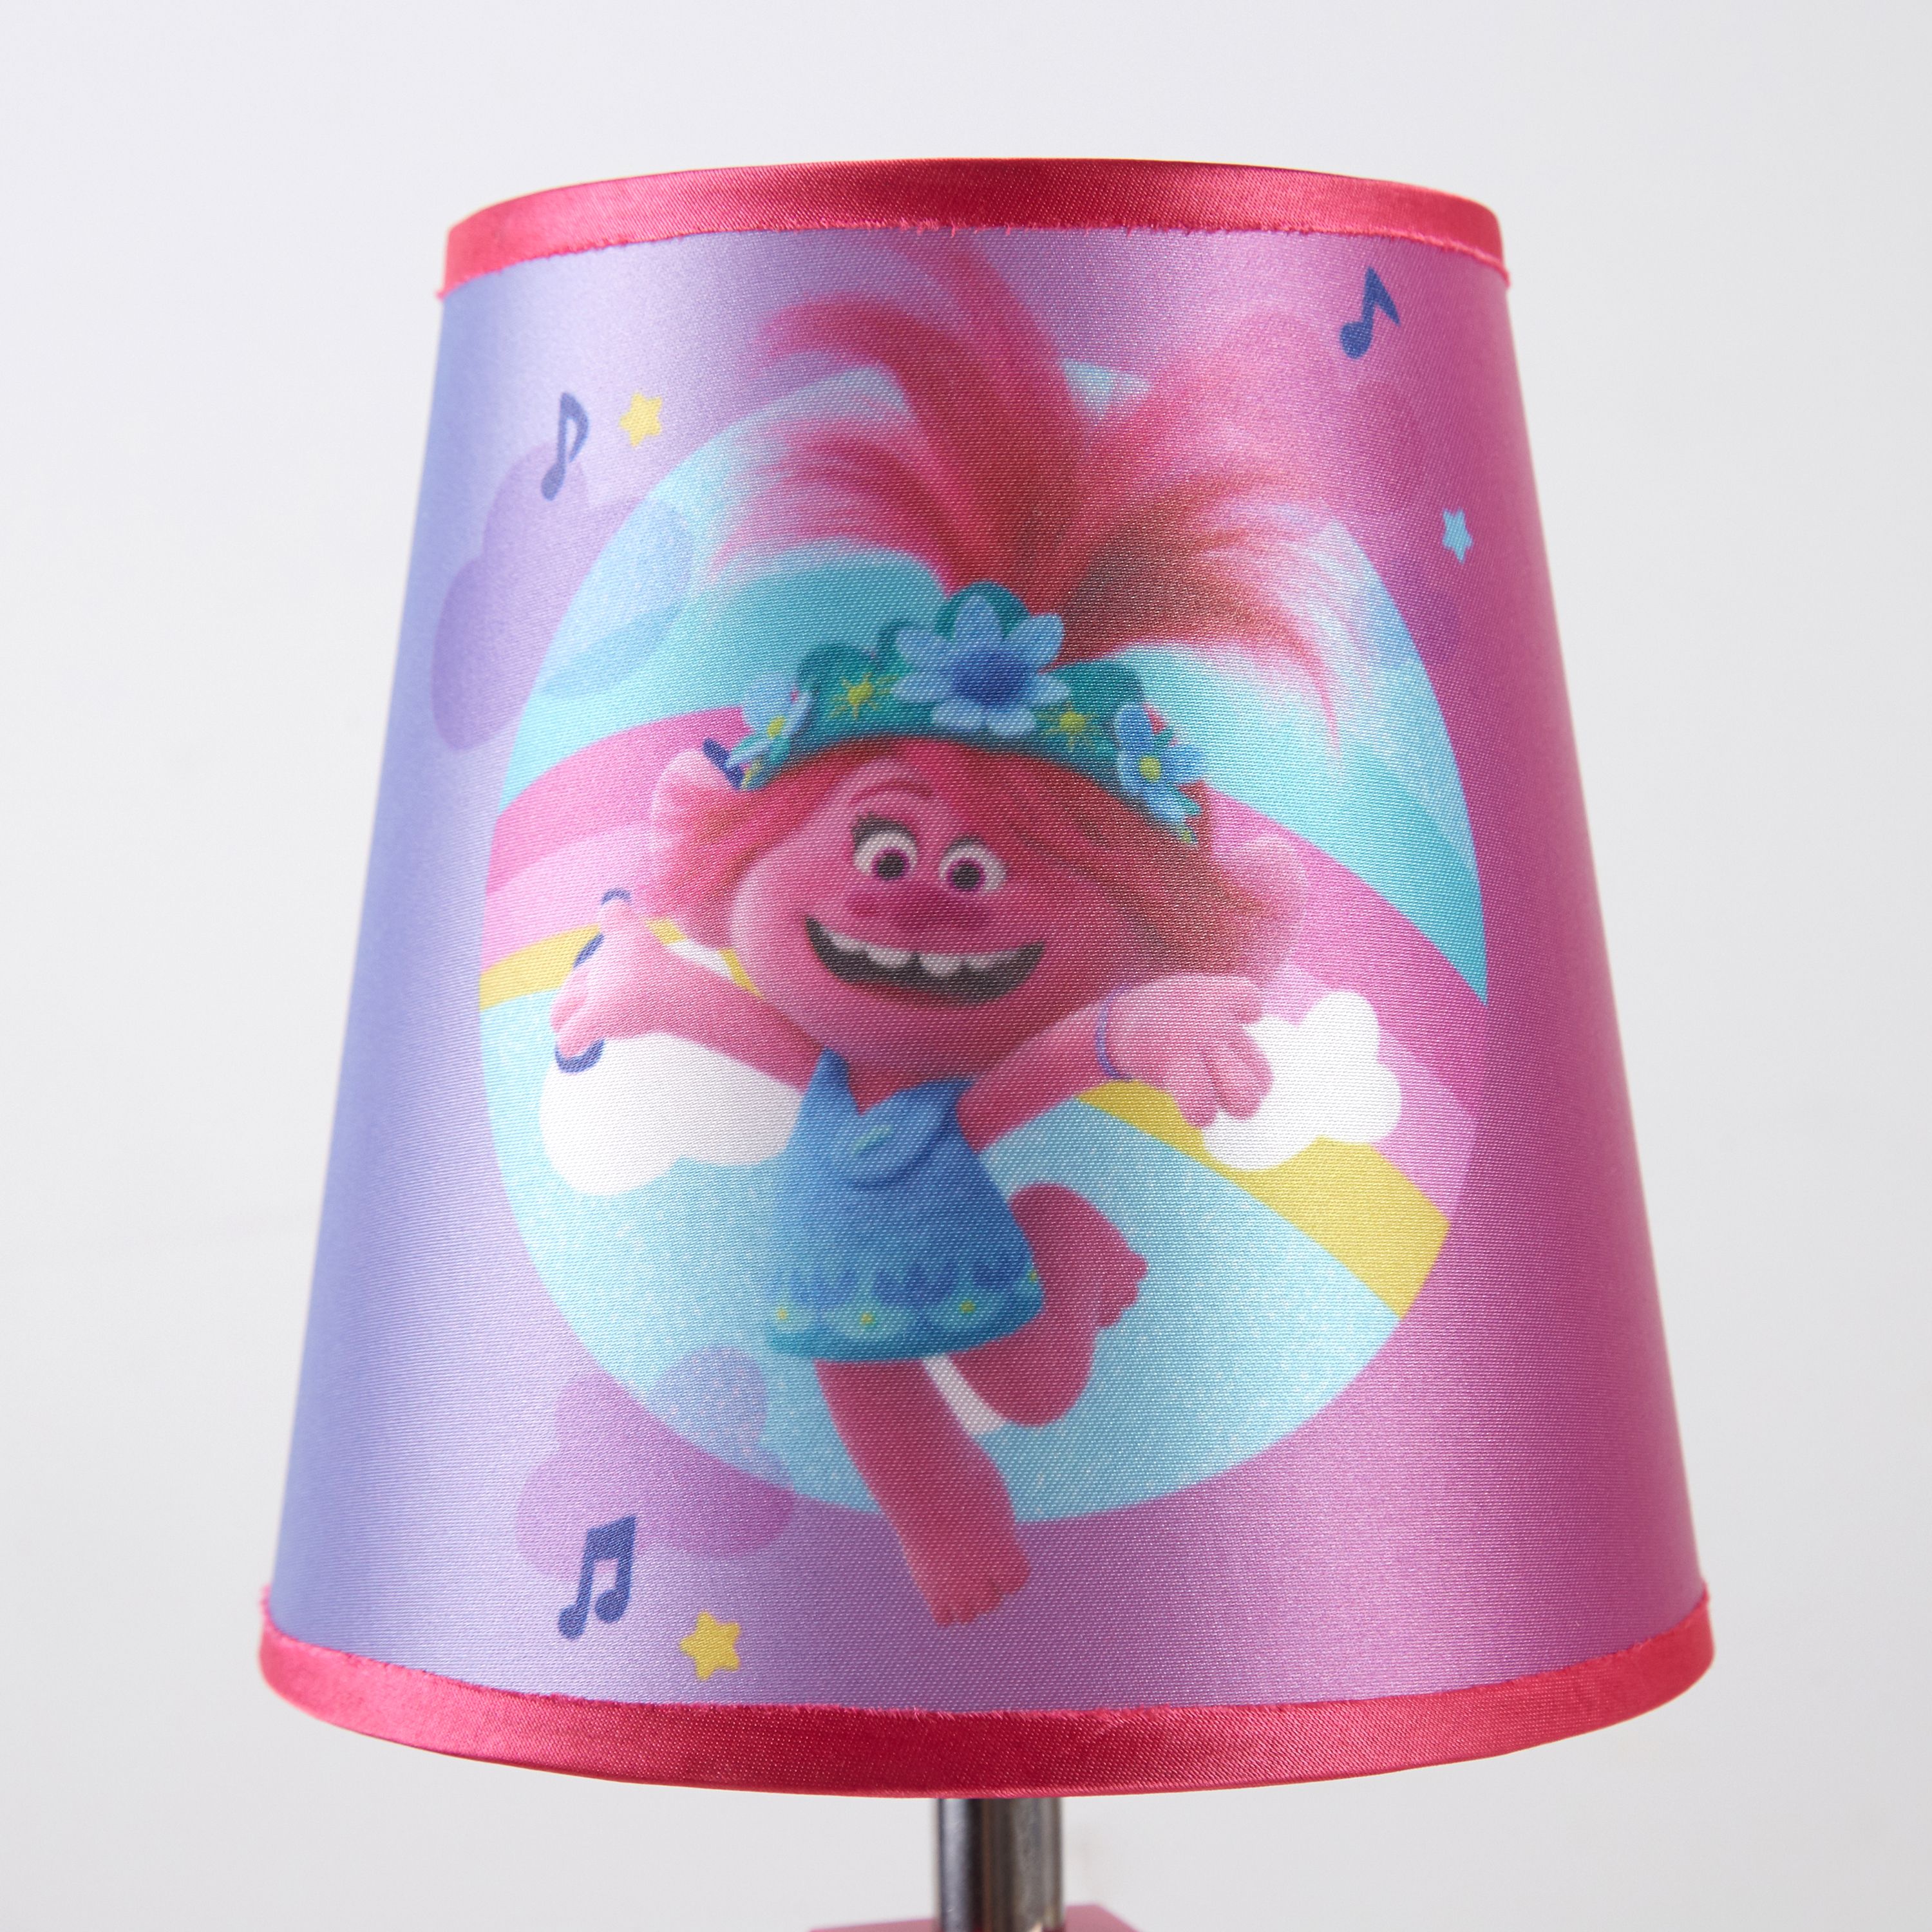 Dreamworks Trolls 2 in 1 Kids Lamp with Night Light - image 4 of 6